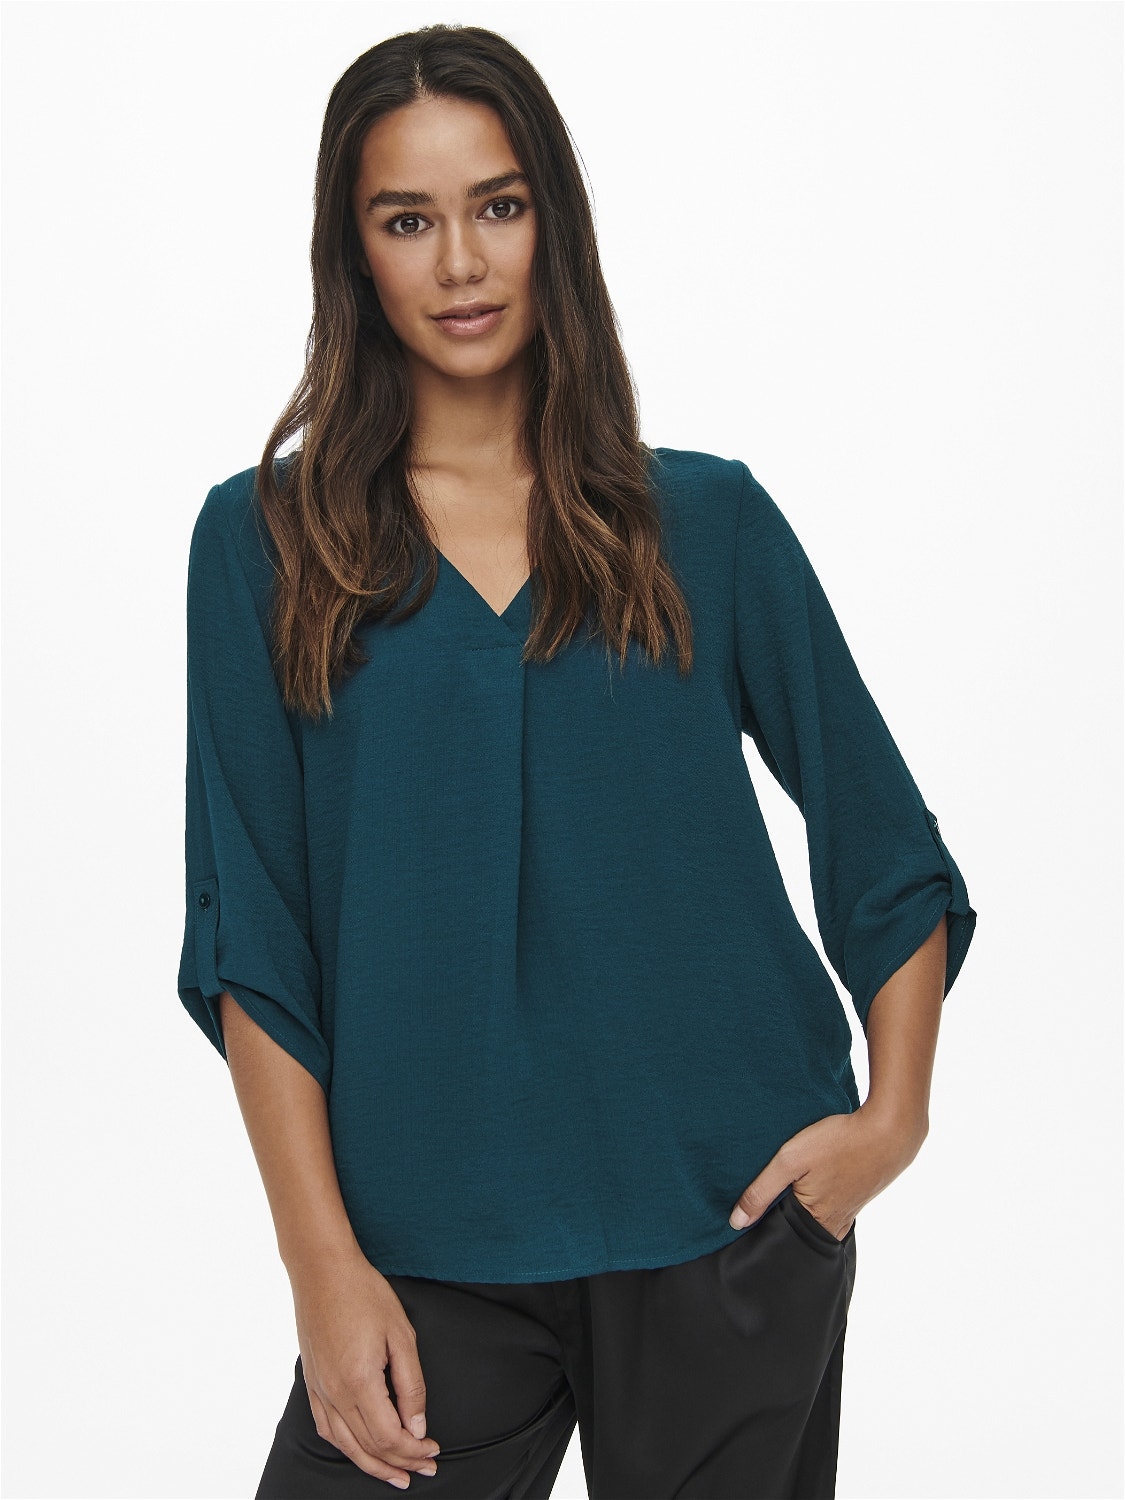 ONLY Loose Fit V-Neck Fold-up cuffs Volume sleeves Top -Reflecting Pond - 15226911